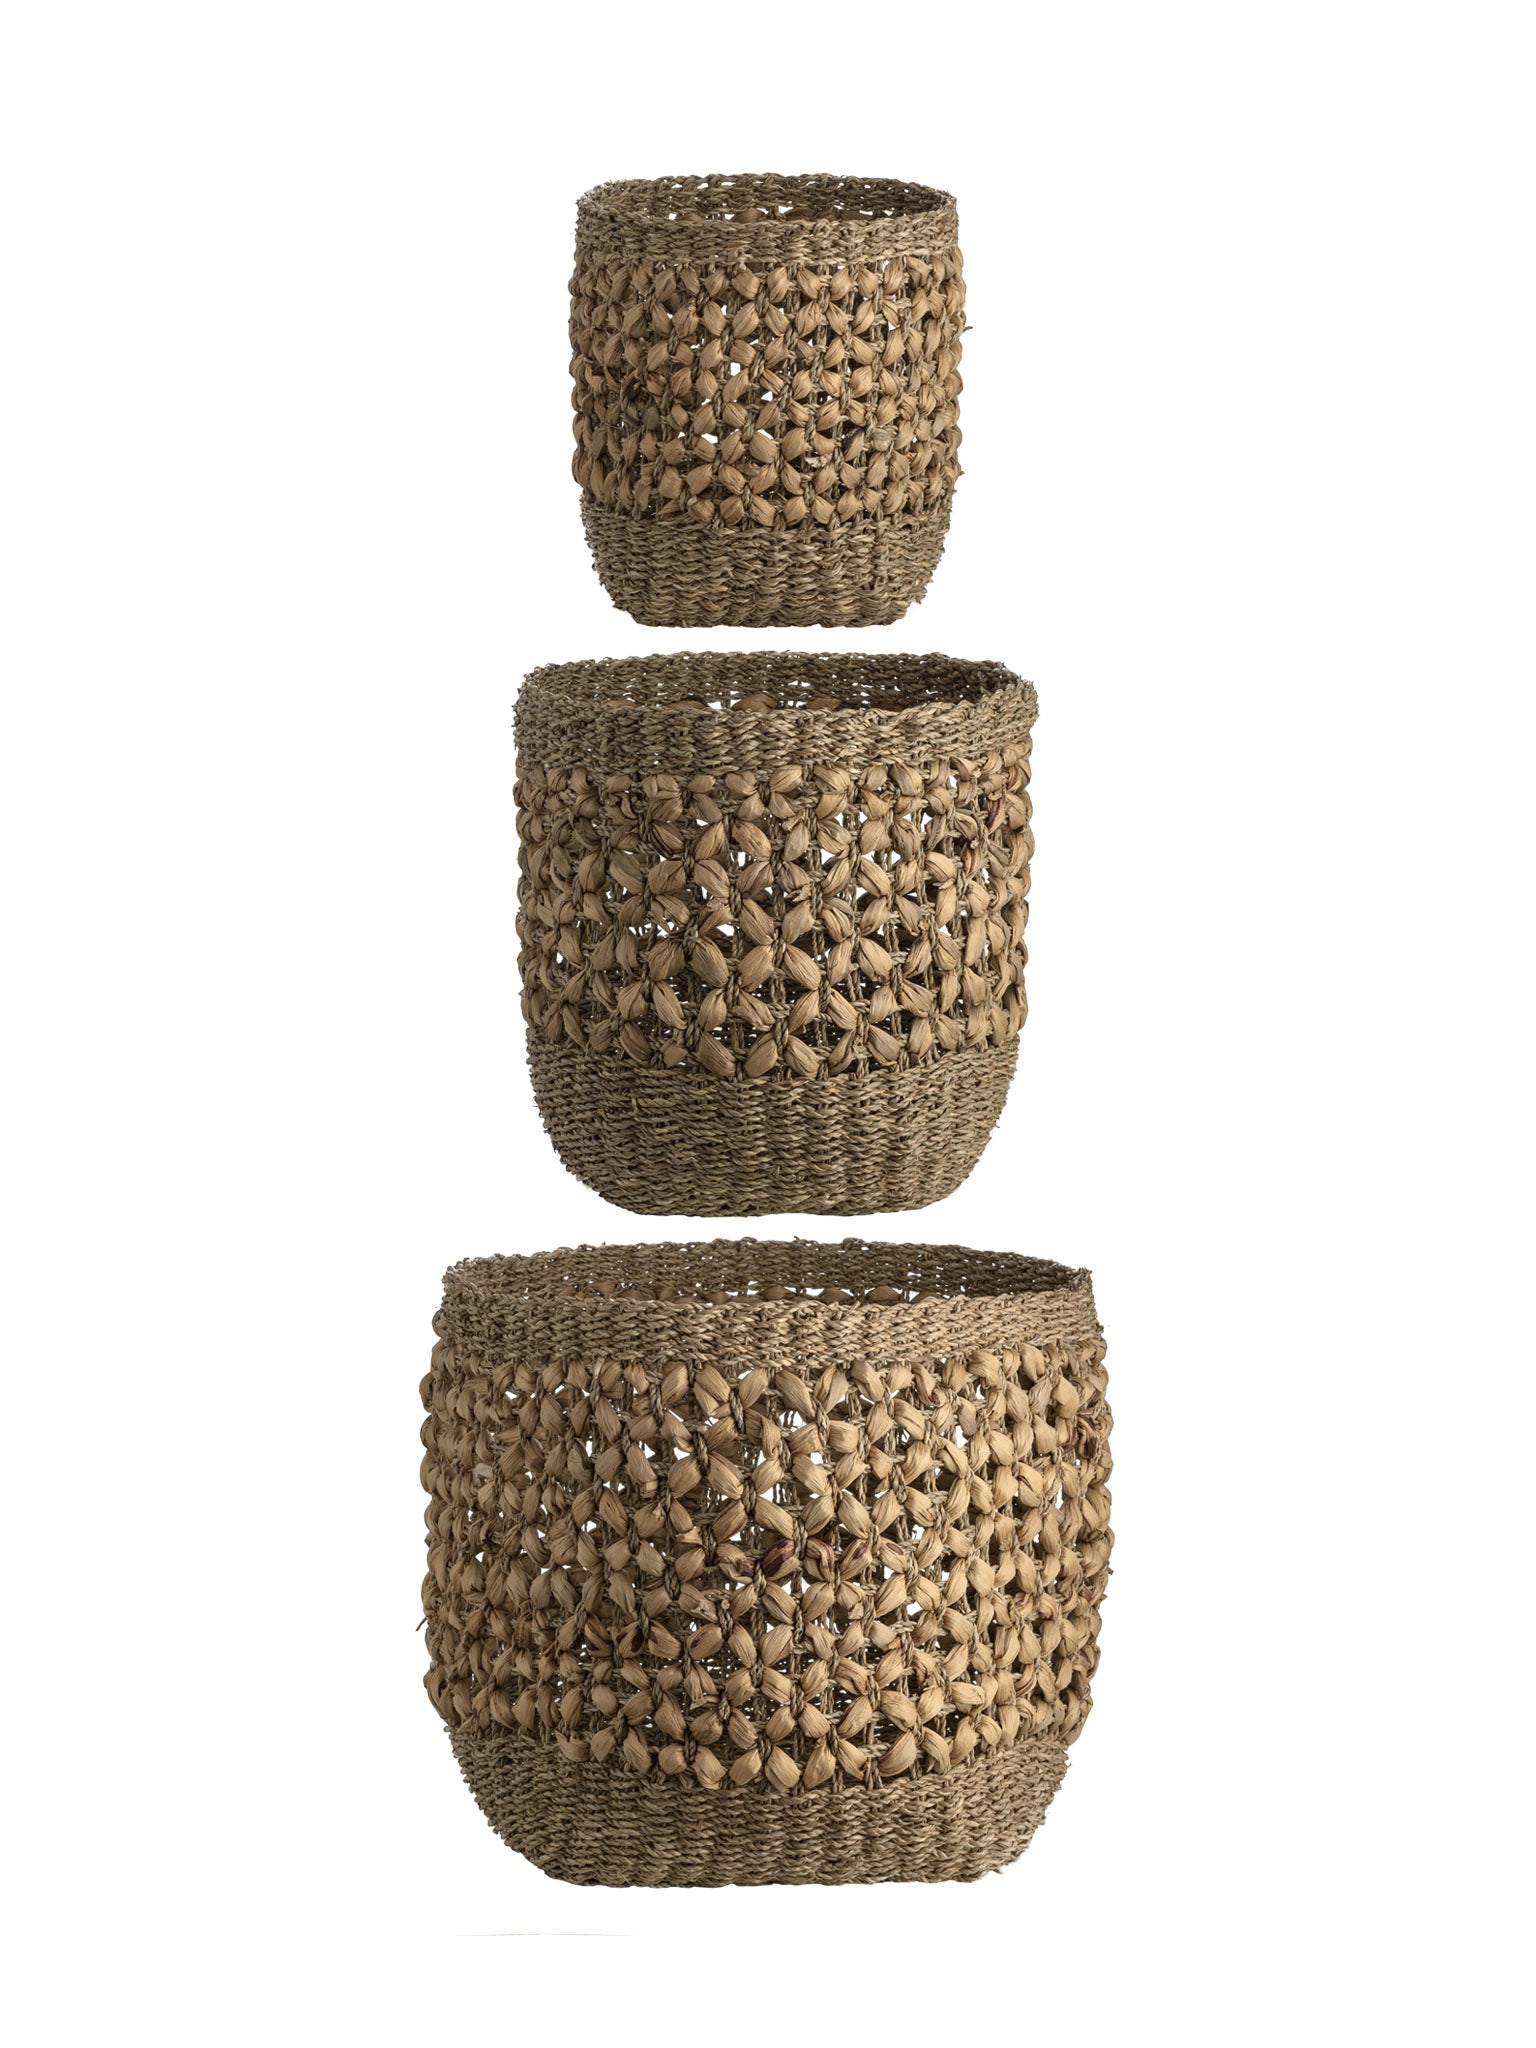 Woven Natural Seagrass and Water Hyacinth Baskets Set of 3